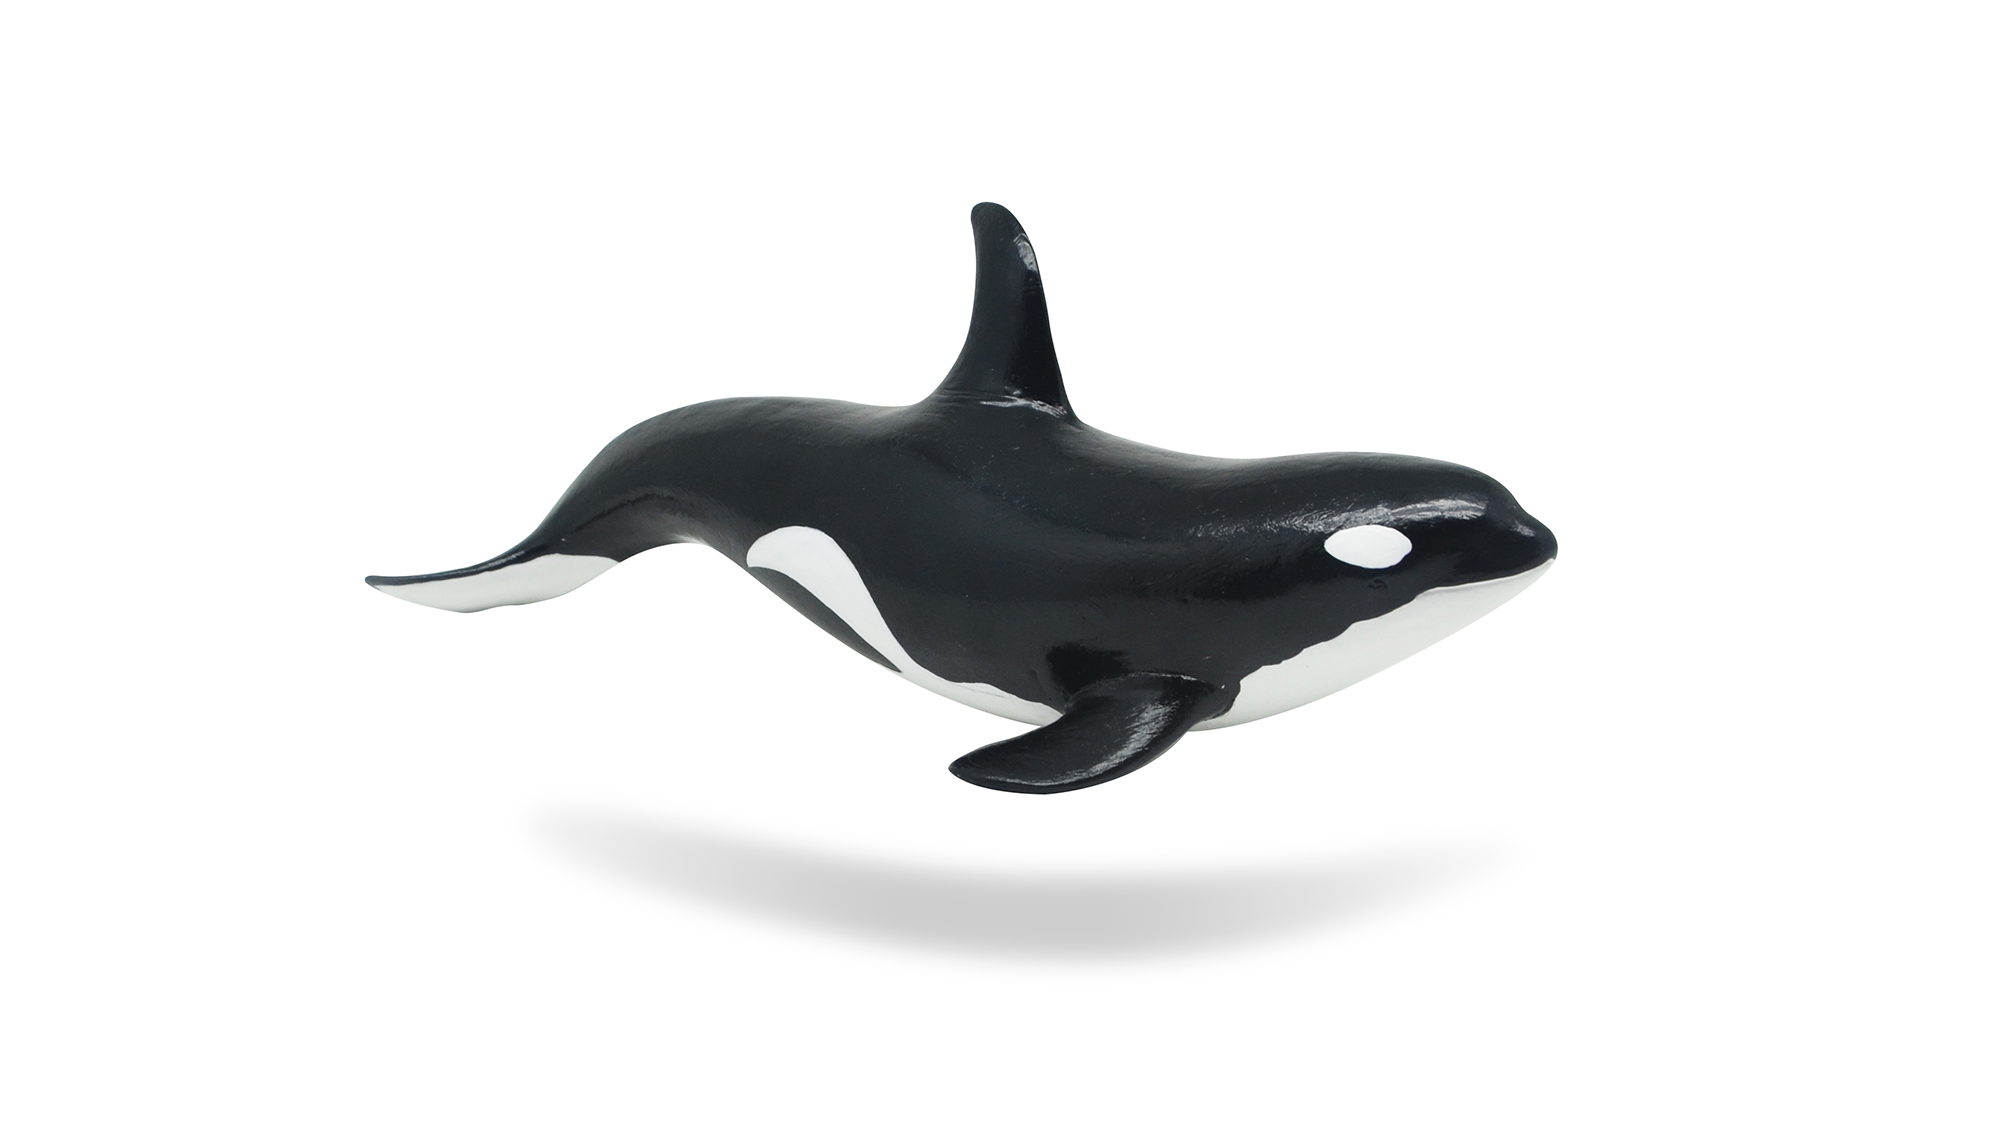 Sea Animal Toy - Orcinus Orca Toy (Killer Whale)